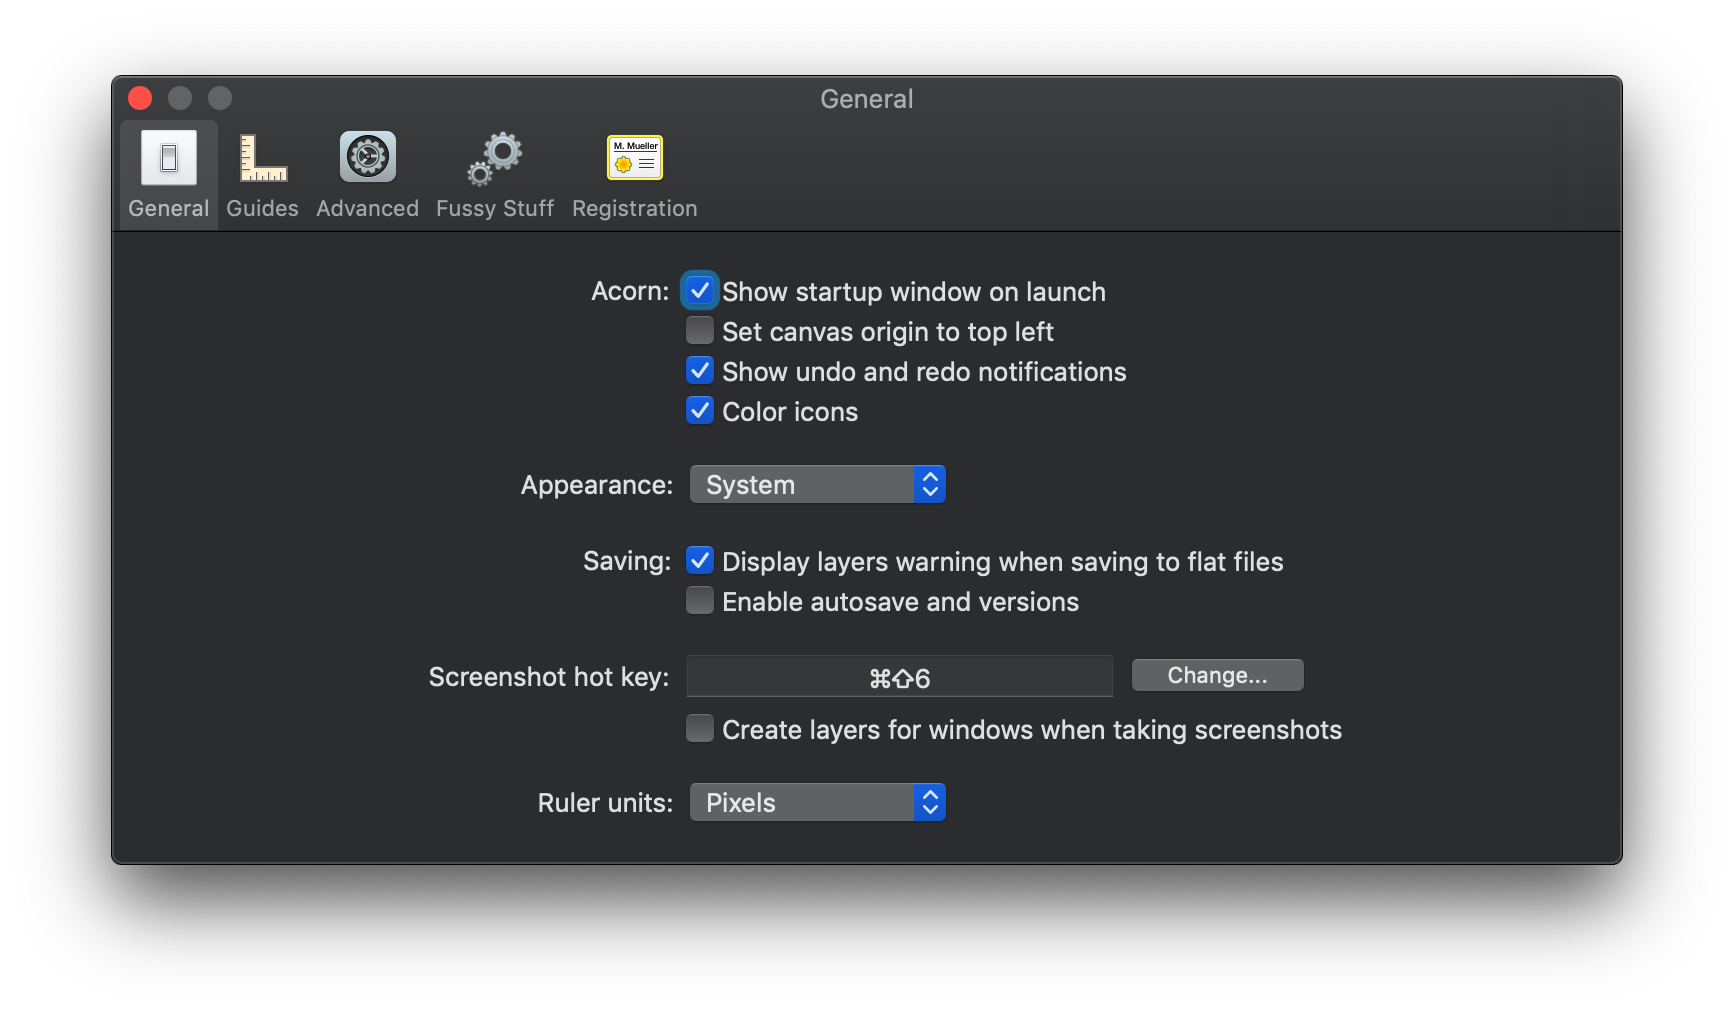 Acorn gives users the option to follow the system-set appearance or force Light or Dark Mode regardless of system settings.